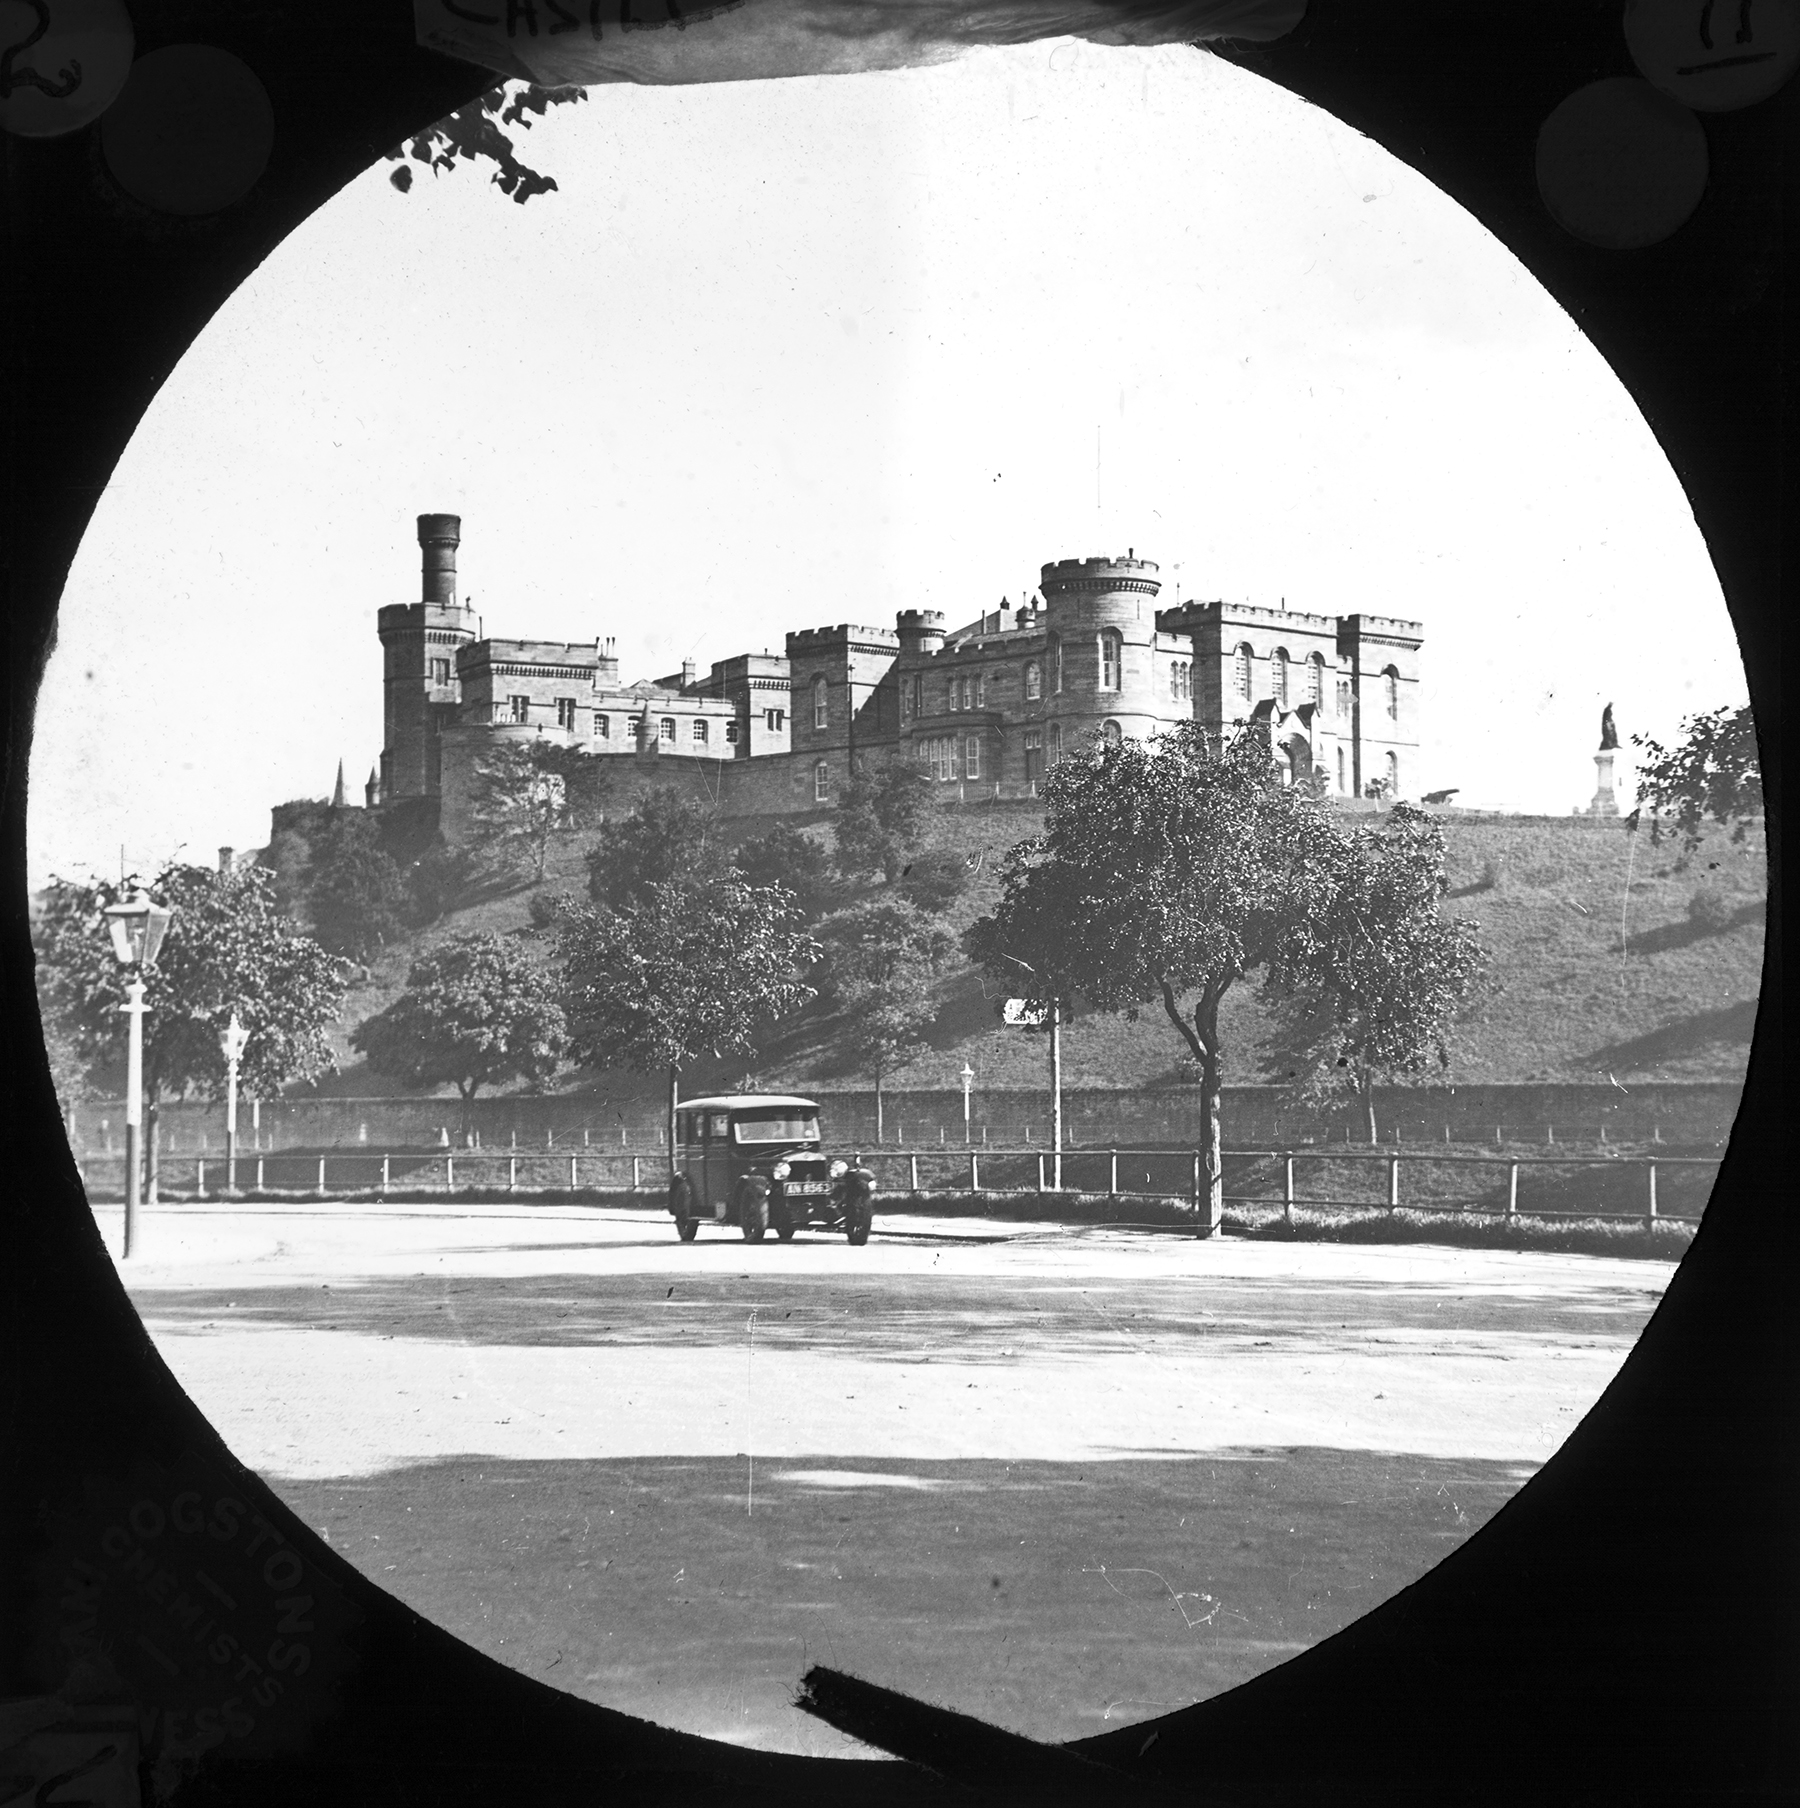 The site of the Scotland’s Inverness Castle has seen a variety of fortifications and castles rise and fall over many centuries. The current castle buildings are visible in this image from the early decades of the 20th century. (Image courtesy of Cook Collection, Inverness Museum and Art Gallery, High Life Highland)